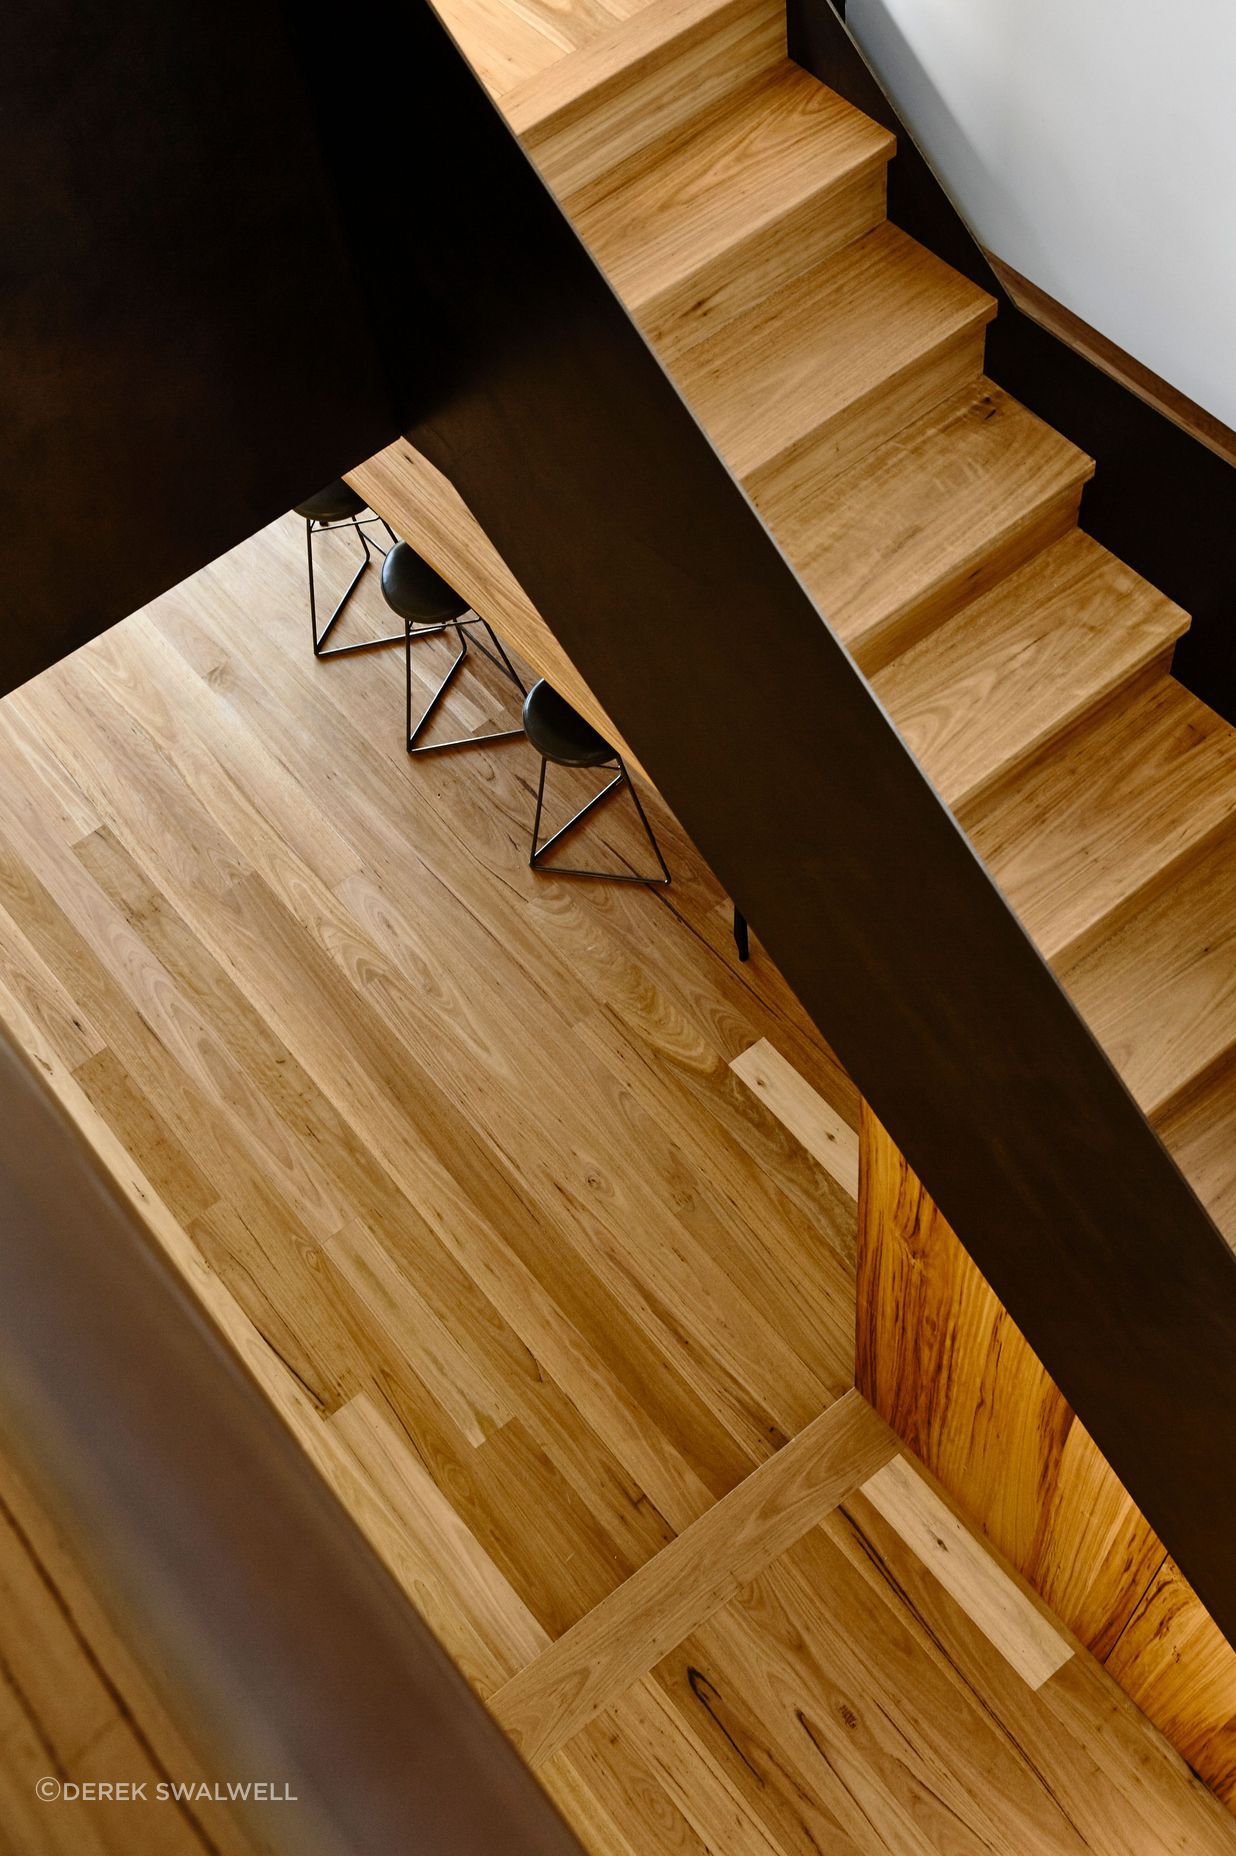 The abundance of timber adds interest at every angle.